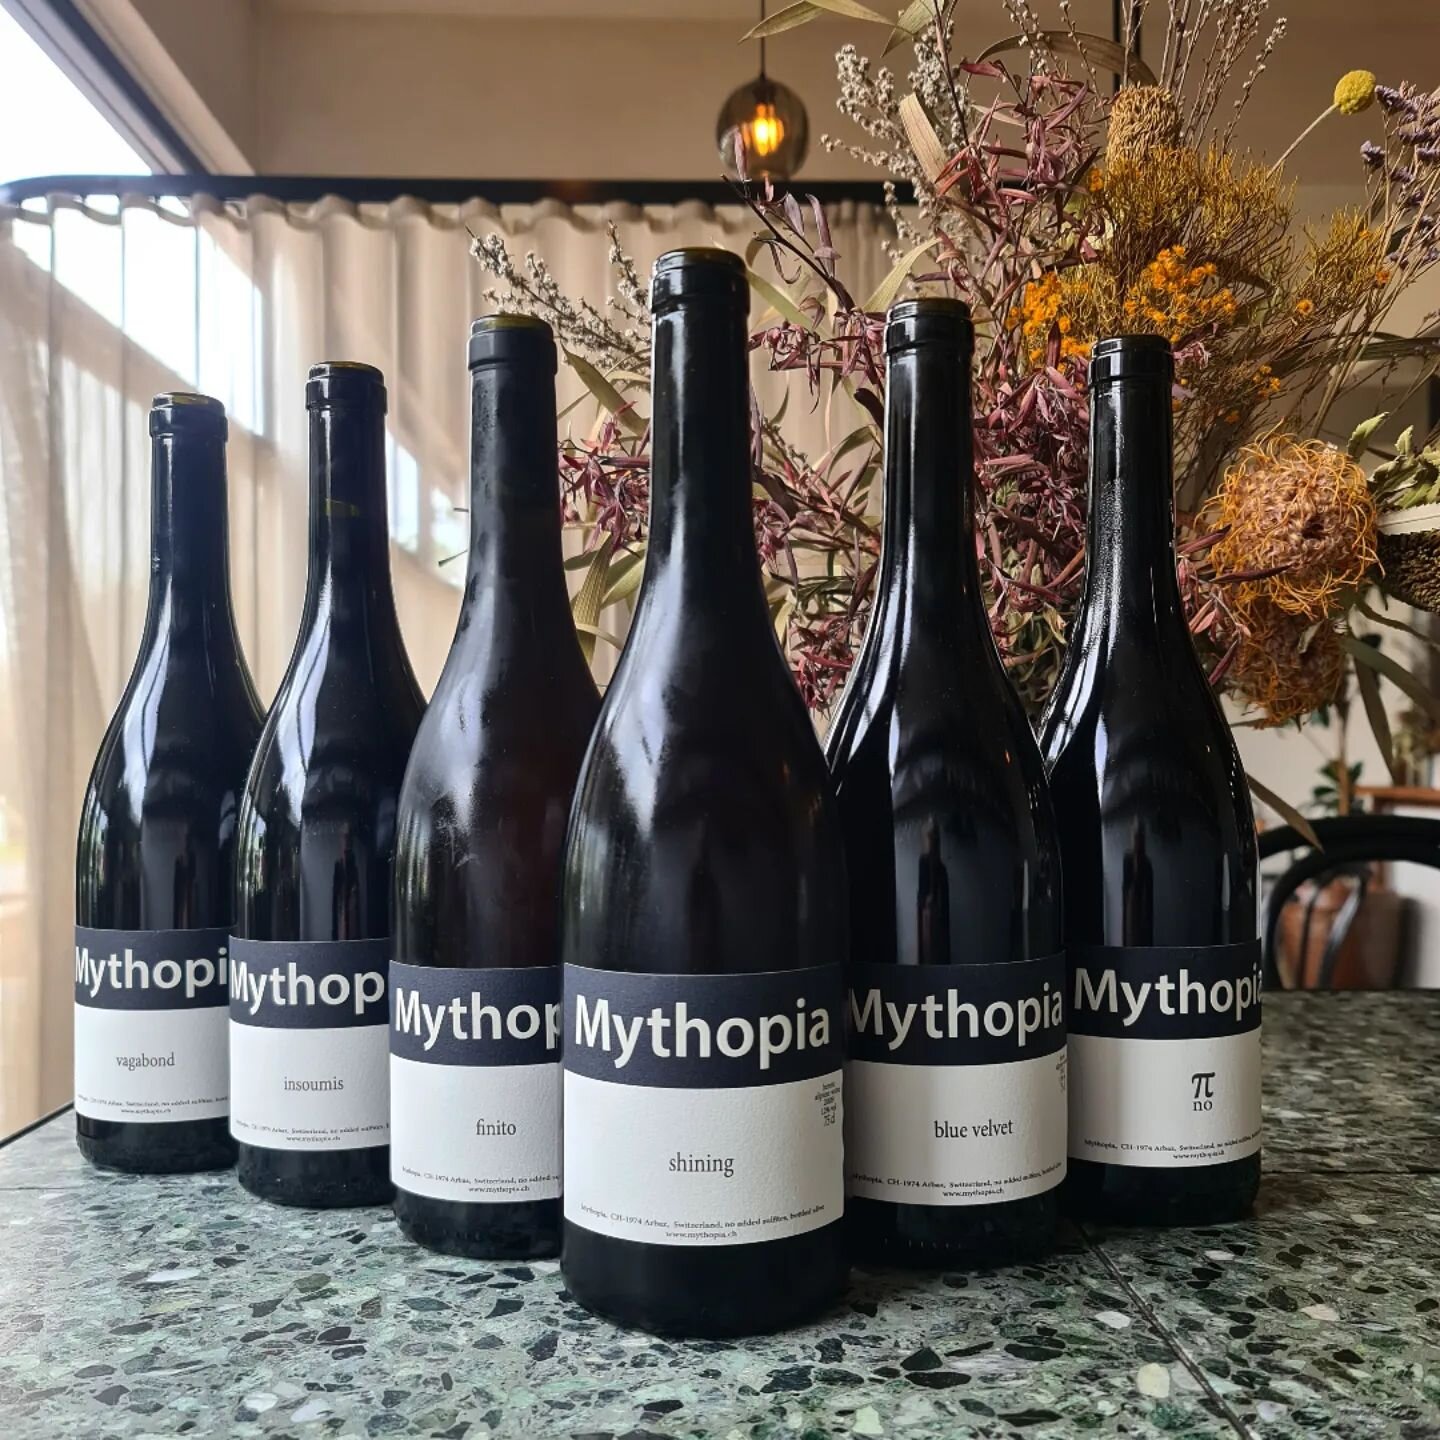 @mythopia_hp is our new international producer in focus.

Based near Sion in the Swiss region of the Valais, these are unique expressions of high altitude/ alpine wine. Unlike most vineyards in the region Hans-peter and Romaine's vines are almost ent